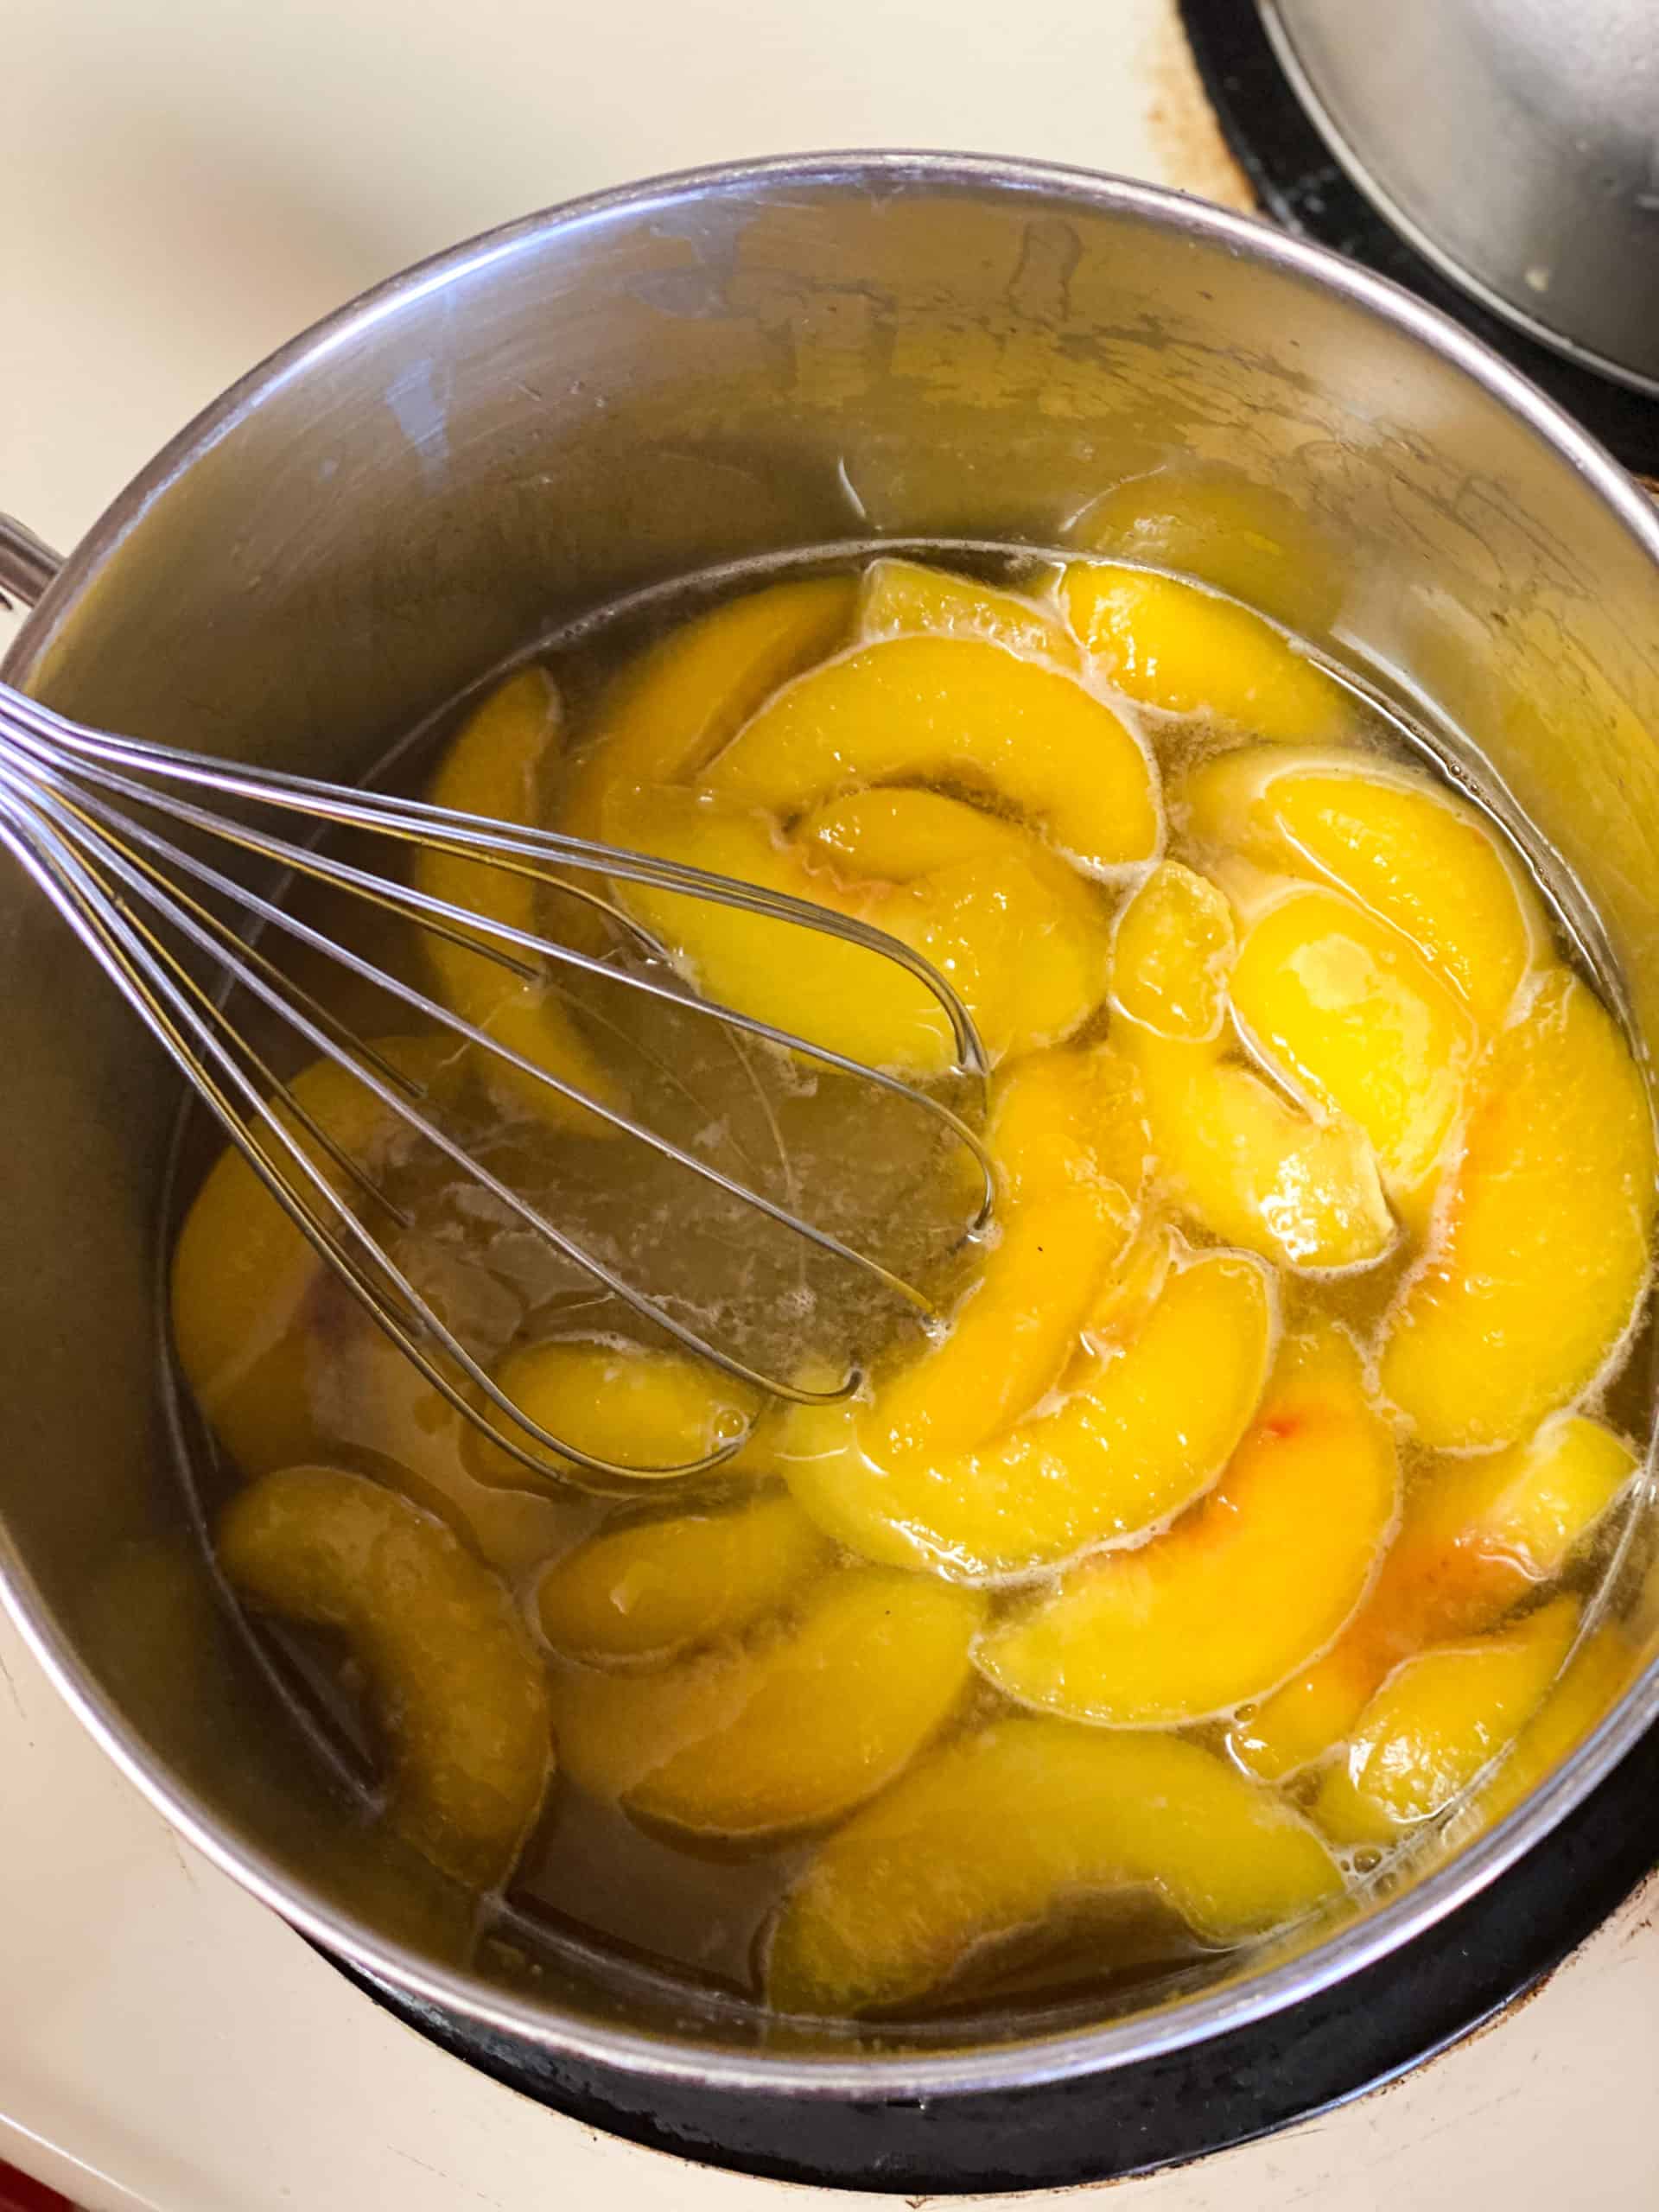 Peaches in sugar water being stirred with a whisk